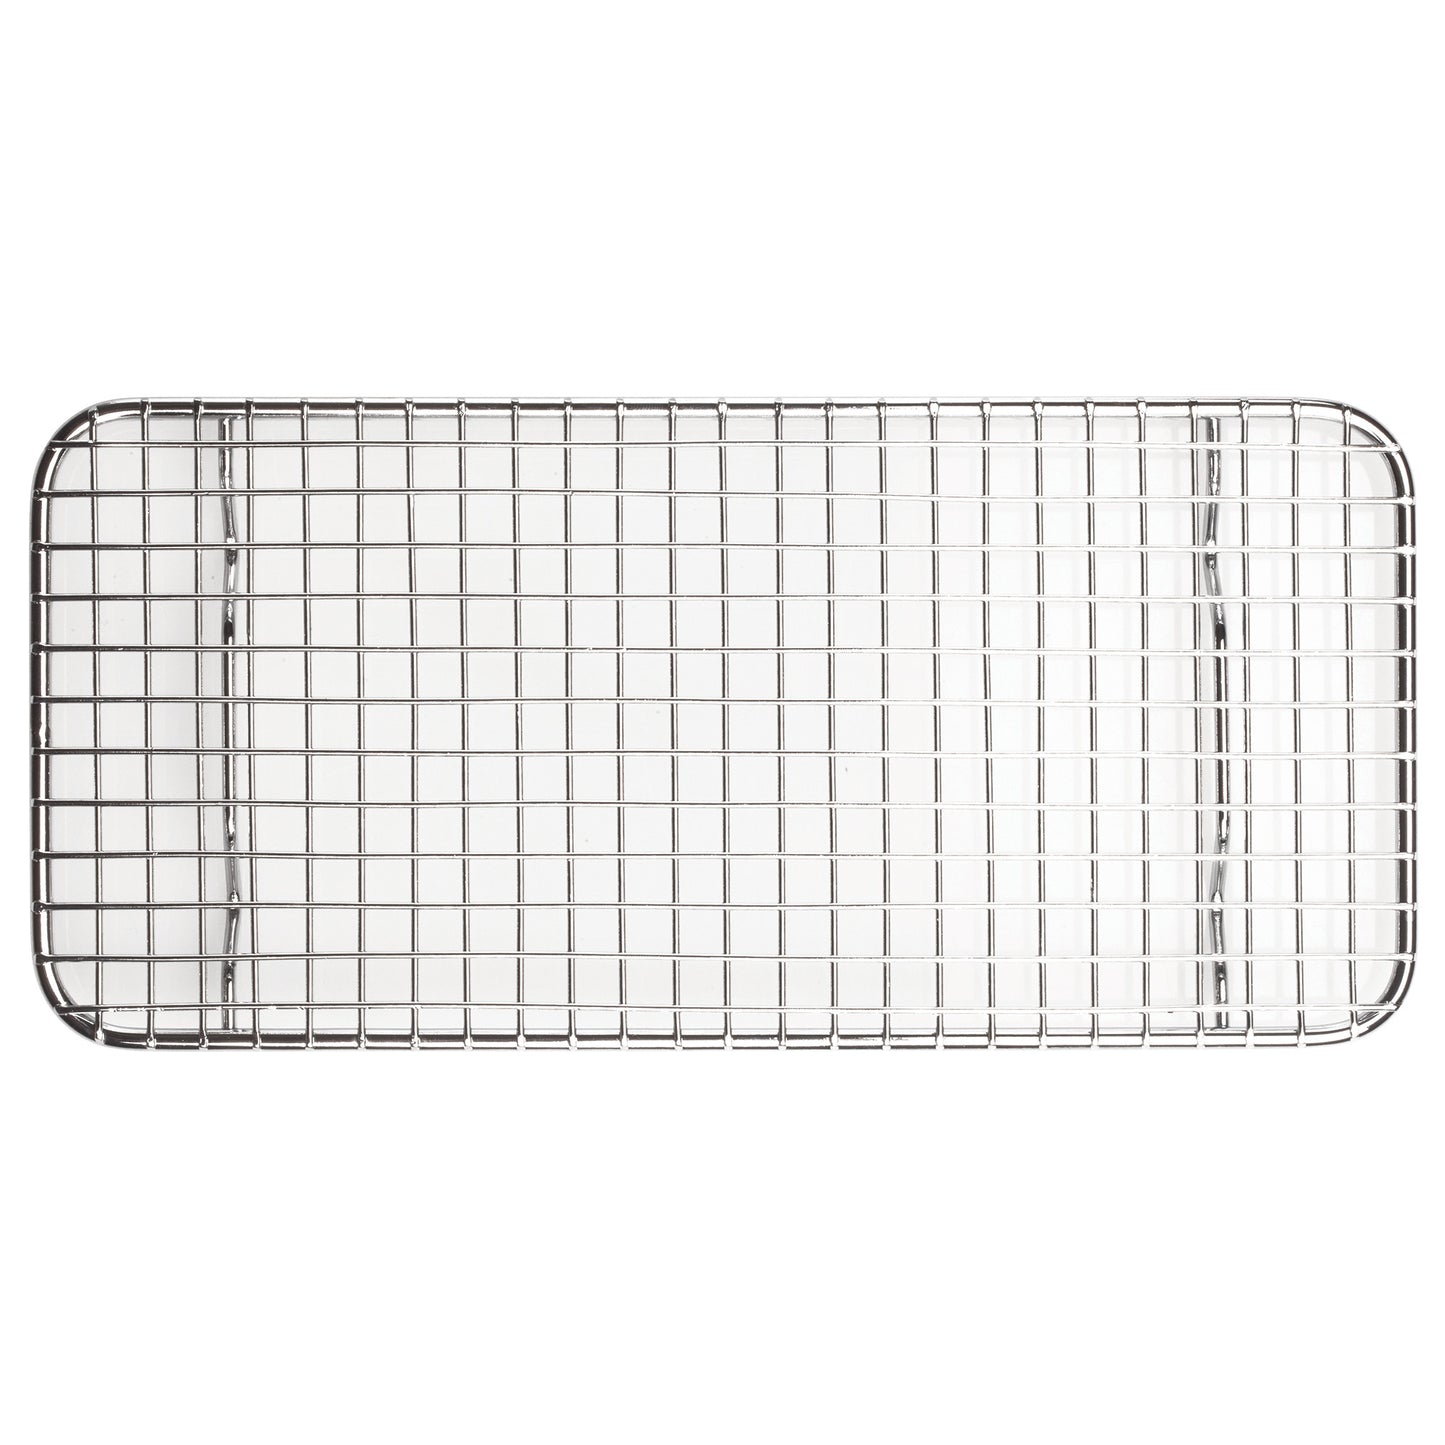 PGWS-510 - Pan Grate for Steam Pan, Stainless Steel - Third (1/3)